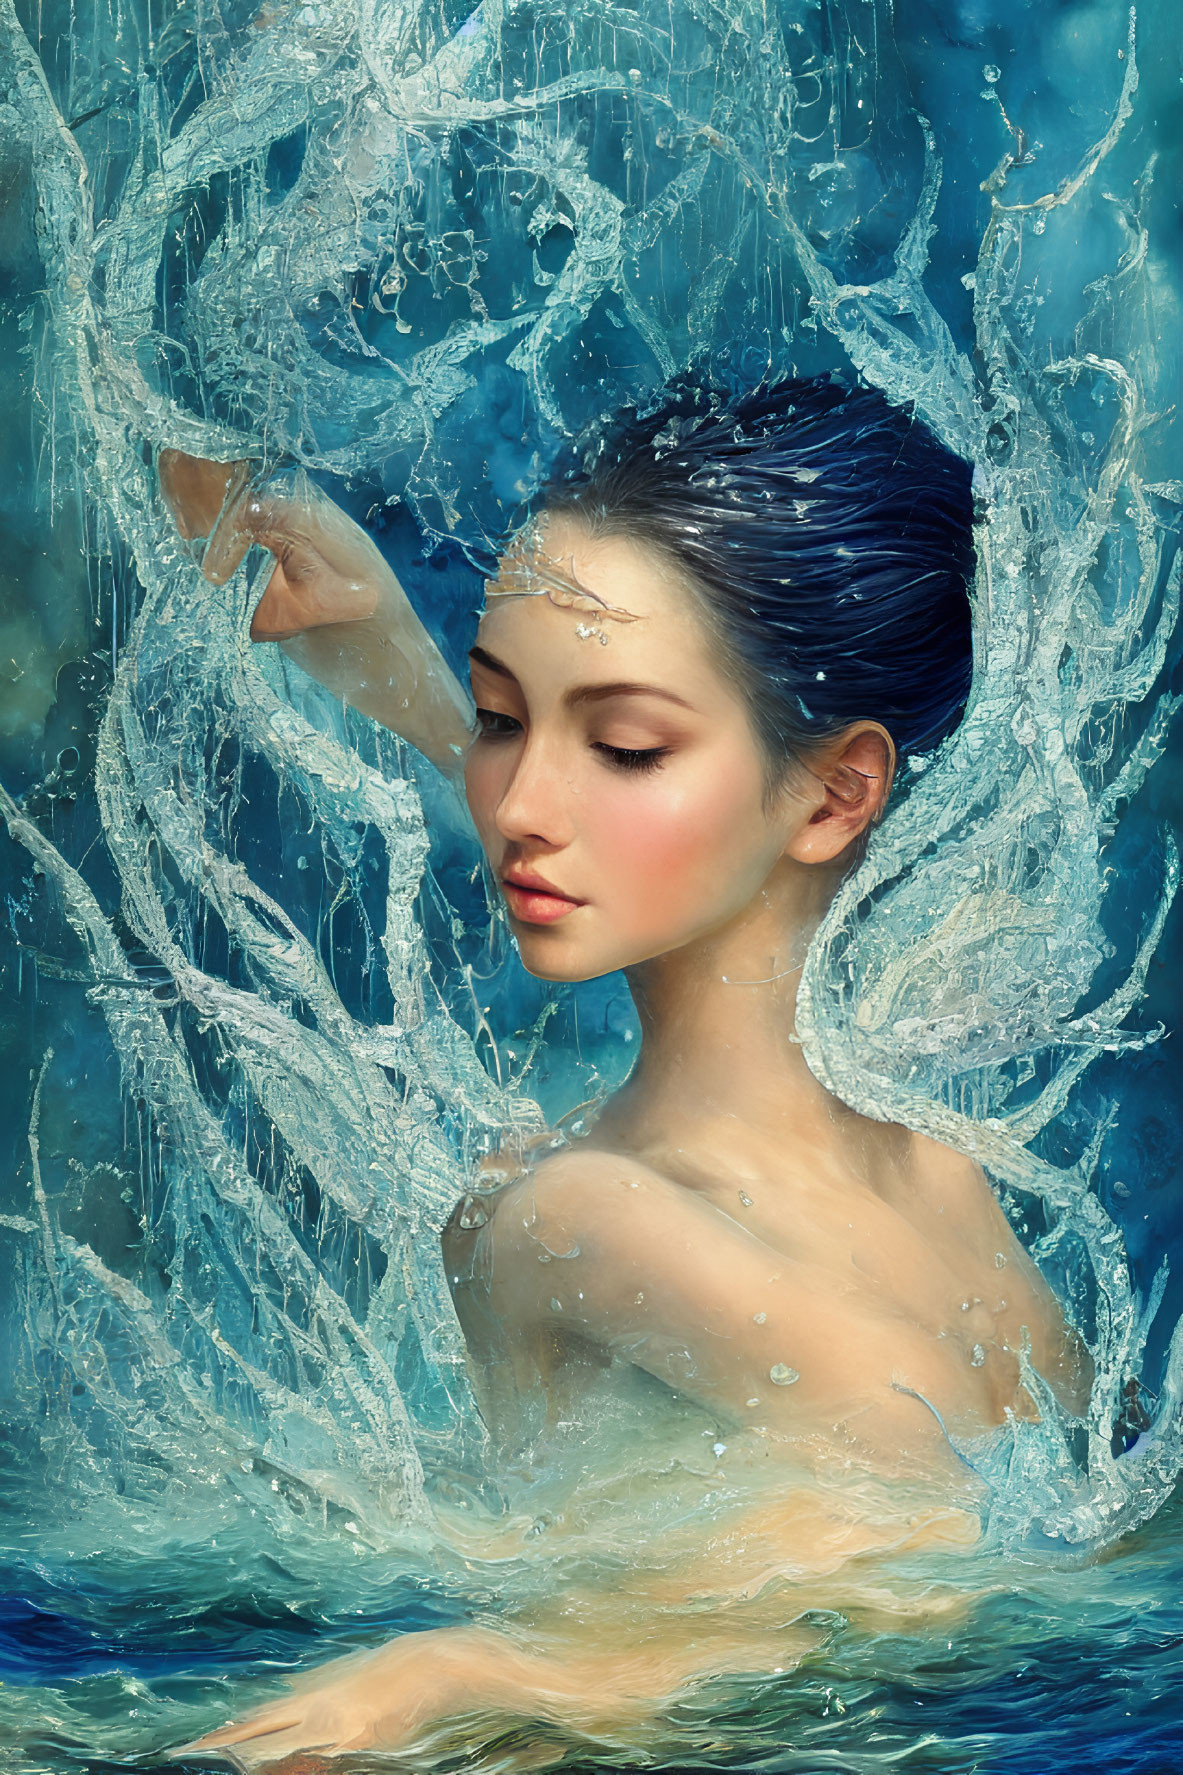 Woman with wet hair emerges from water in mystical scene